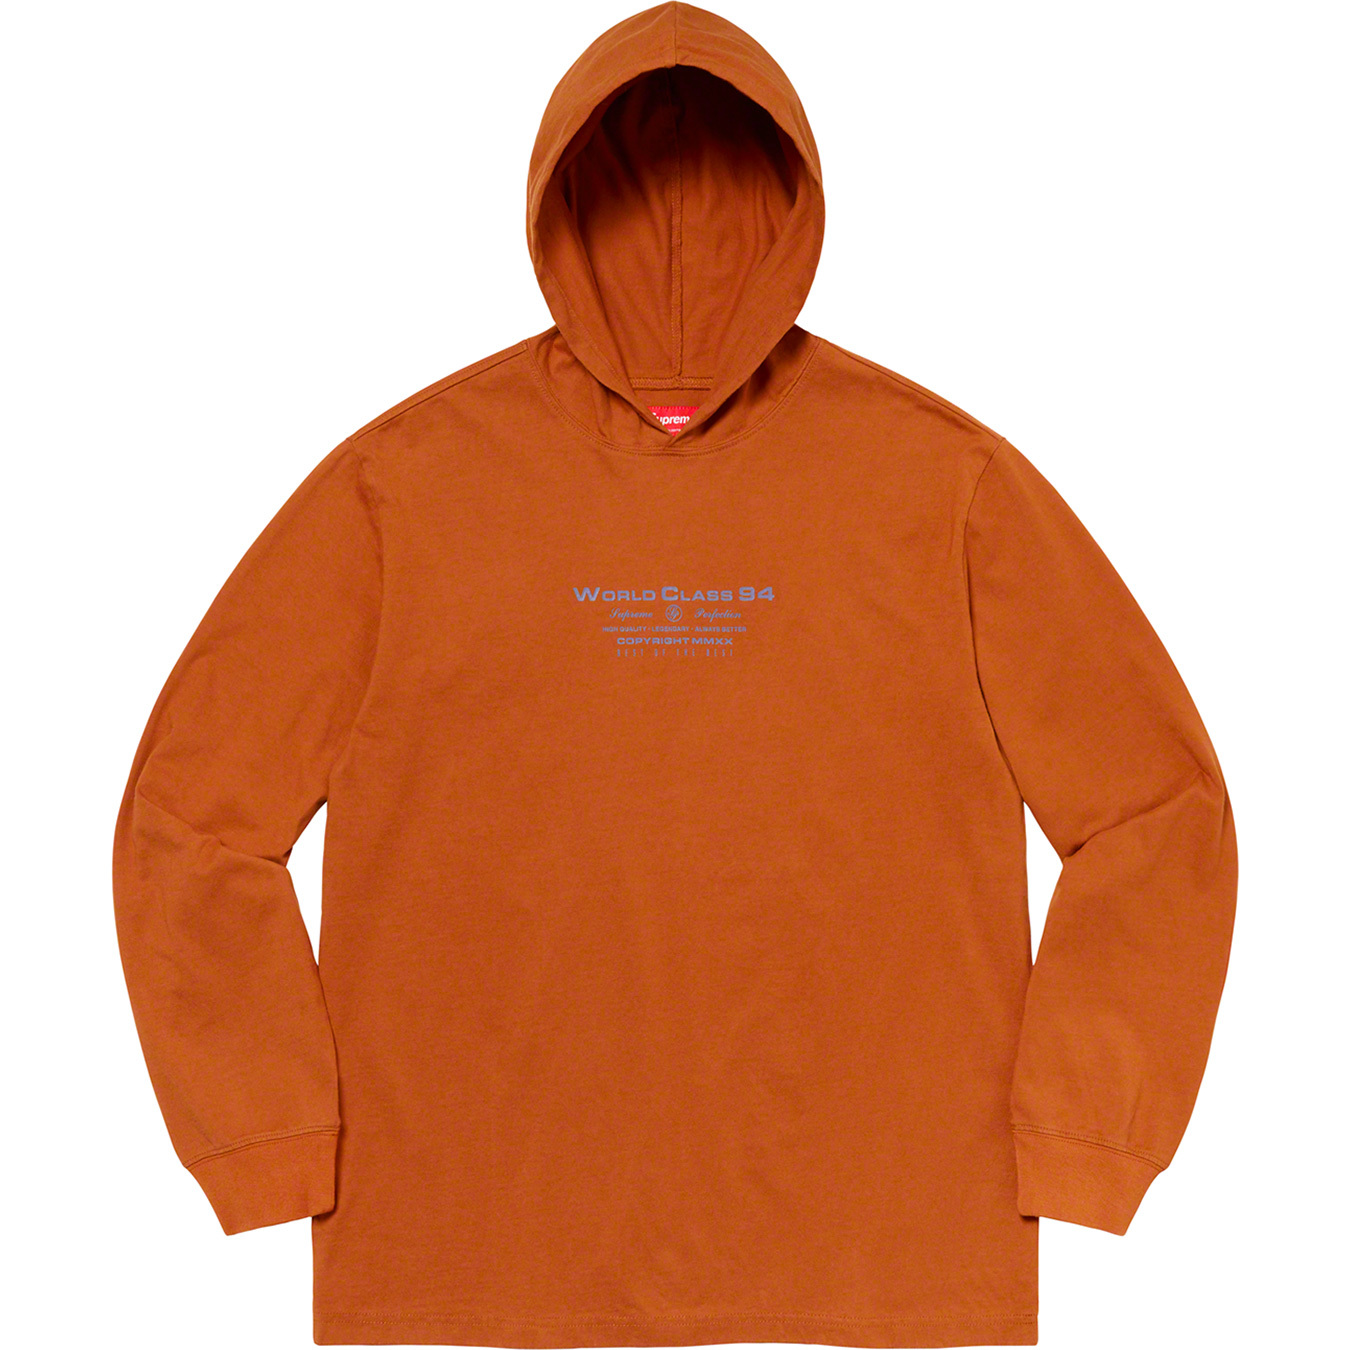 Best Of The Best Hooded L/S Top | Supreme 20fw